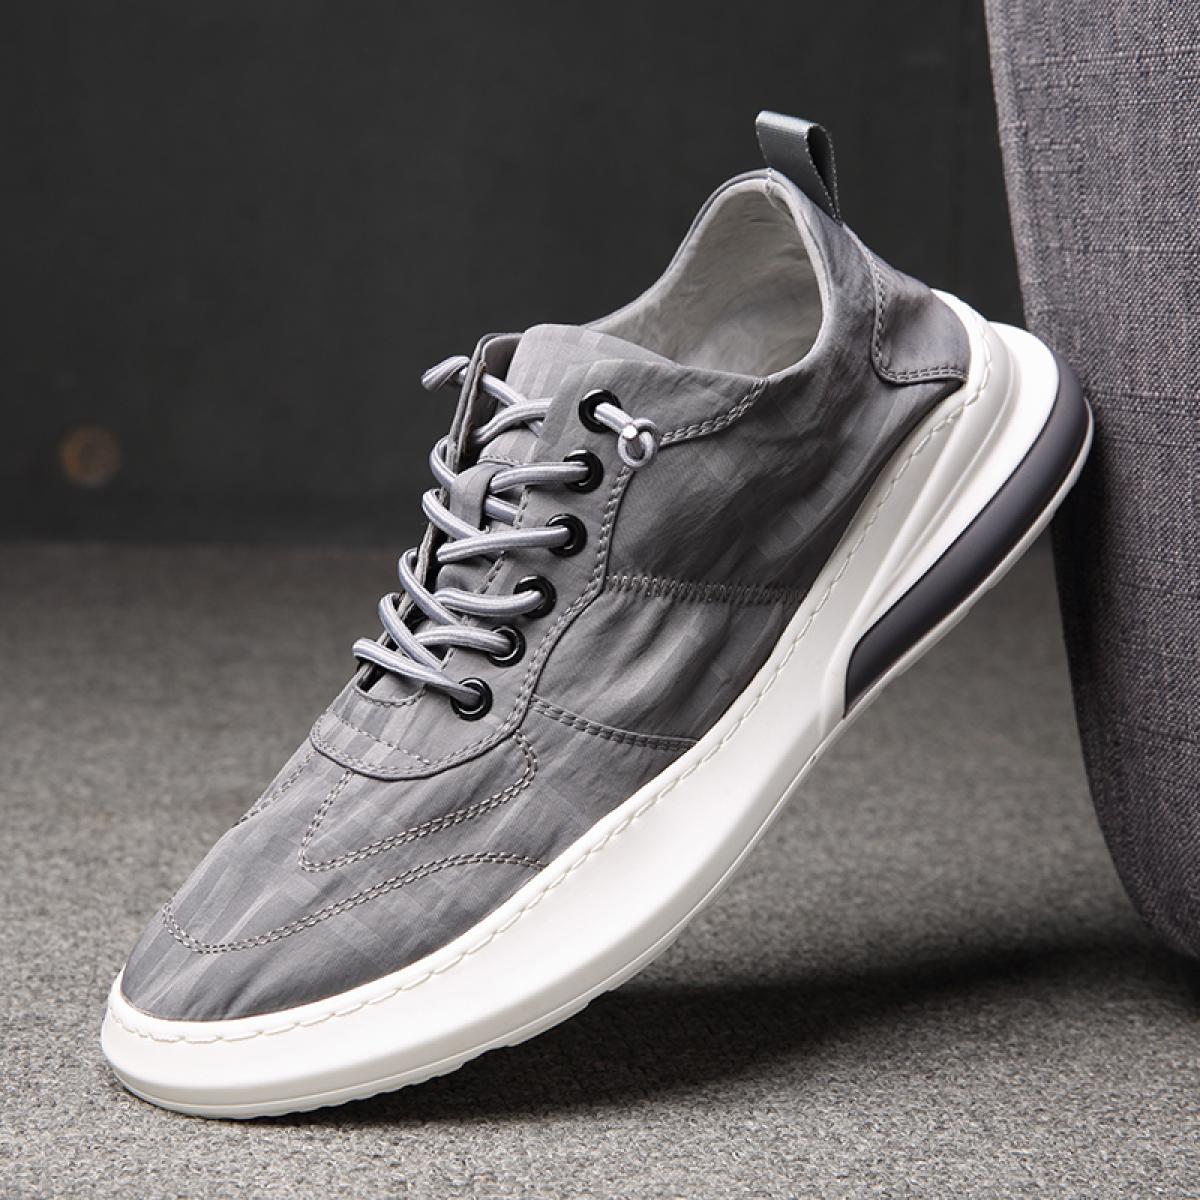 Mens Lightweight Casual Canvas Shoes Breathable Soft Sole Sports Shoes Men's Thin Fashion Casual Slippers Low Top Summer